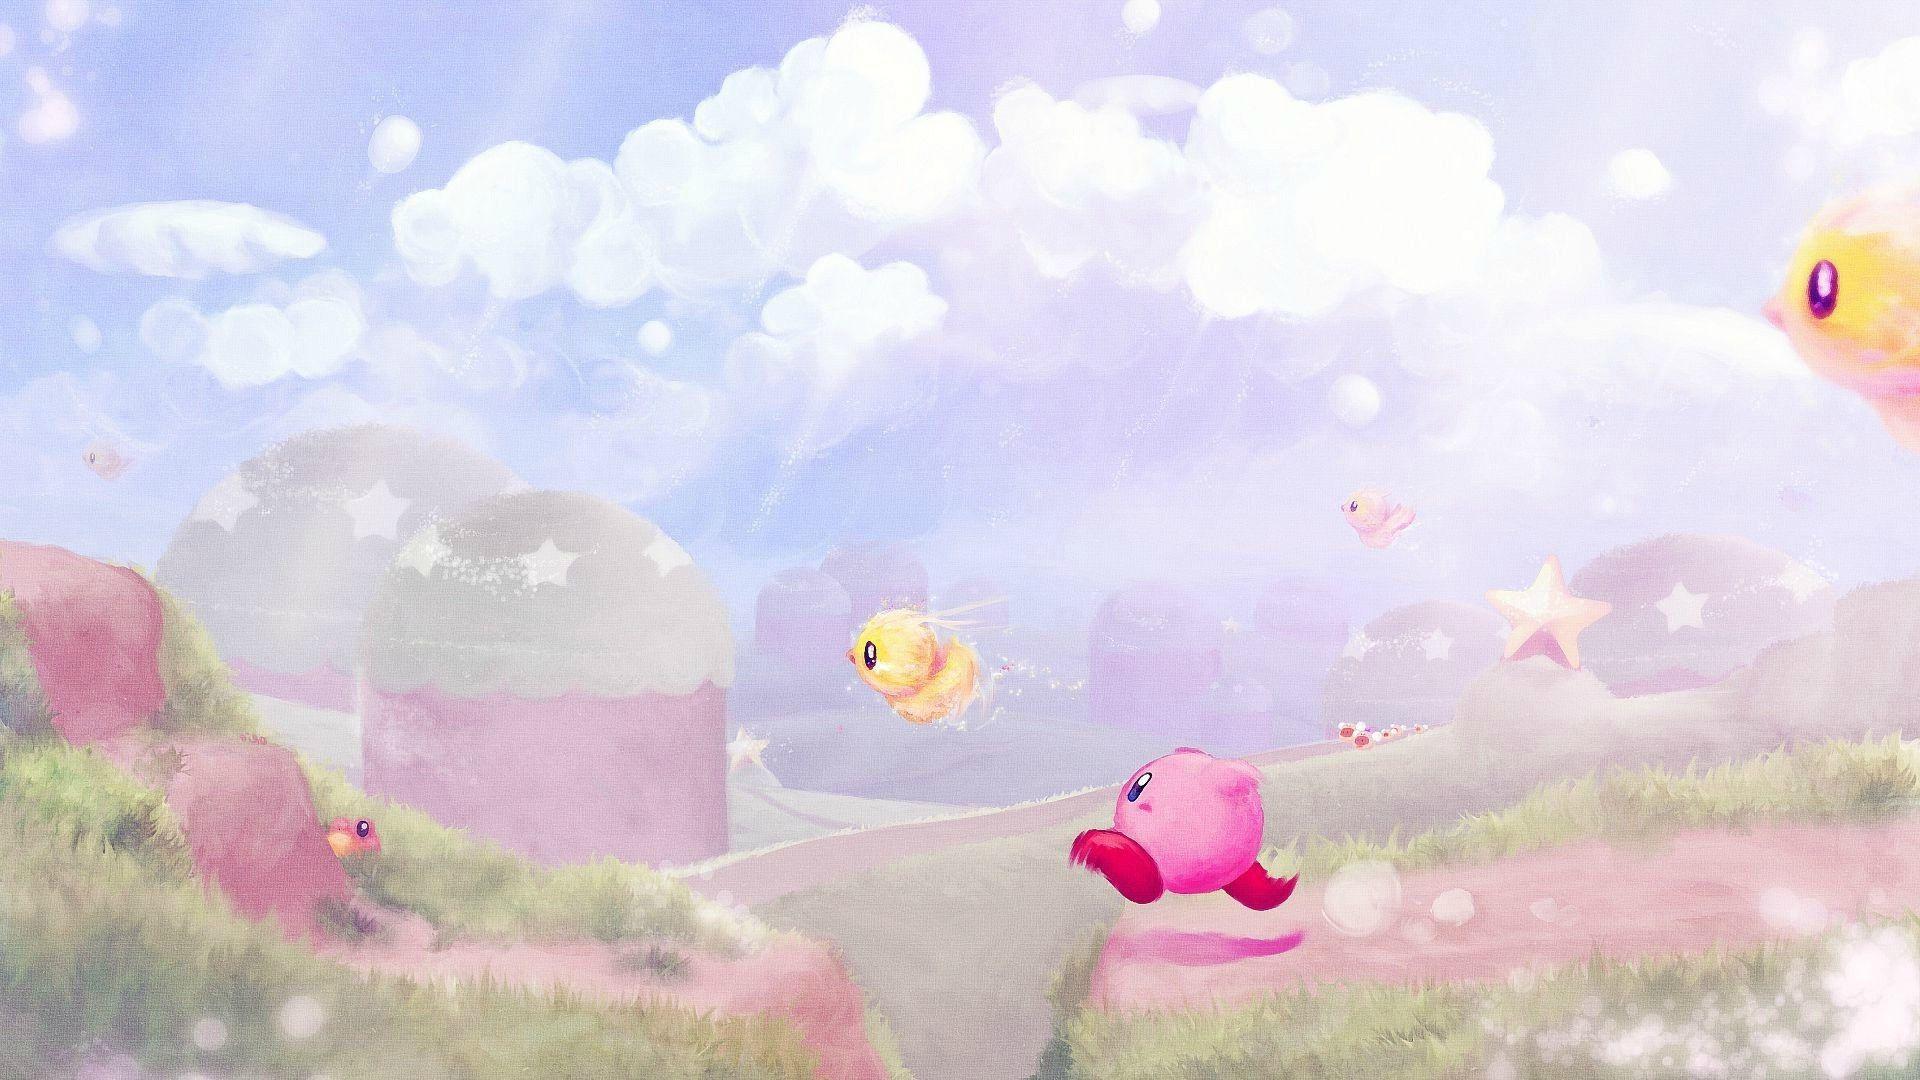 A beautiful Kirby wallpaper I made for my phone. - Kirby